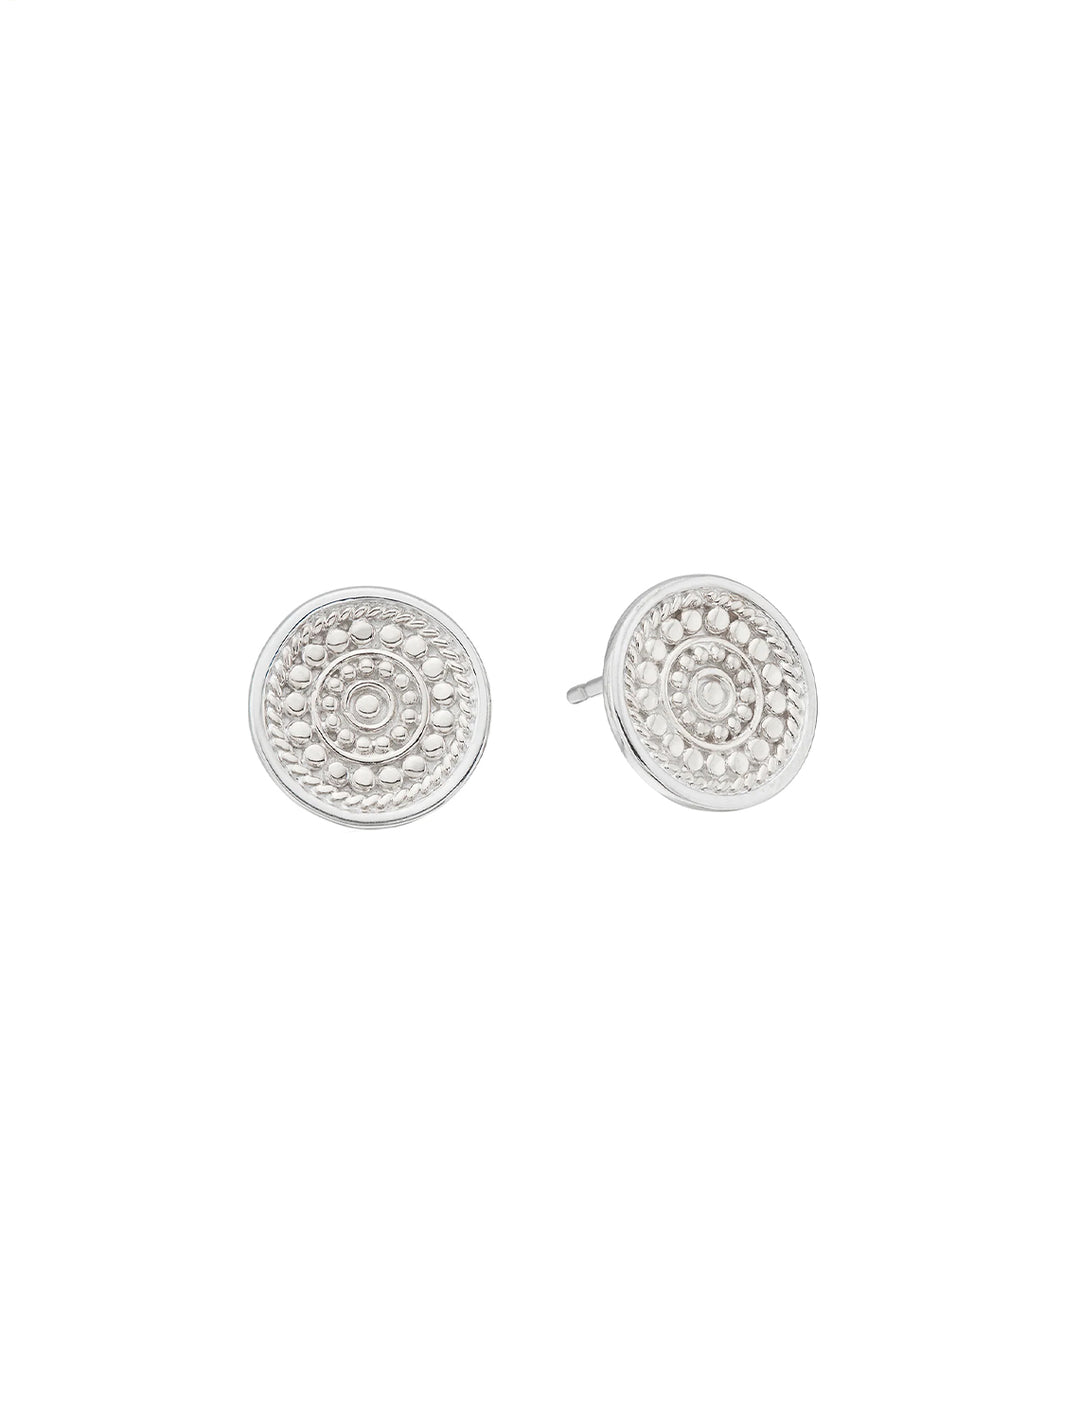 Front view of Anna Beck's contrast dotted studs in silver.